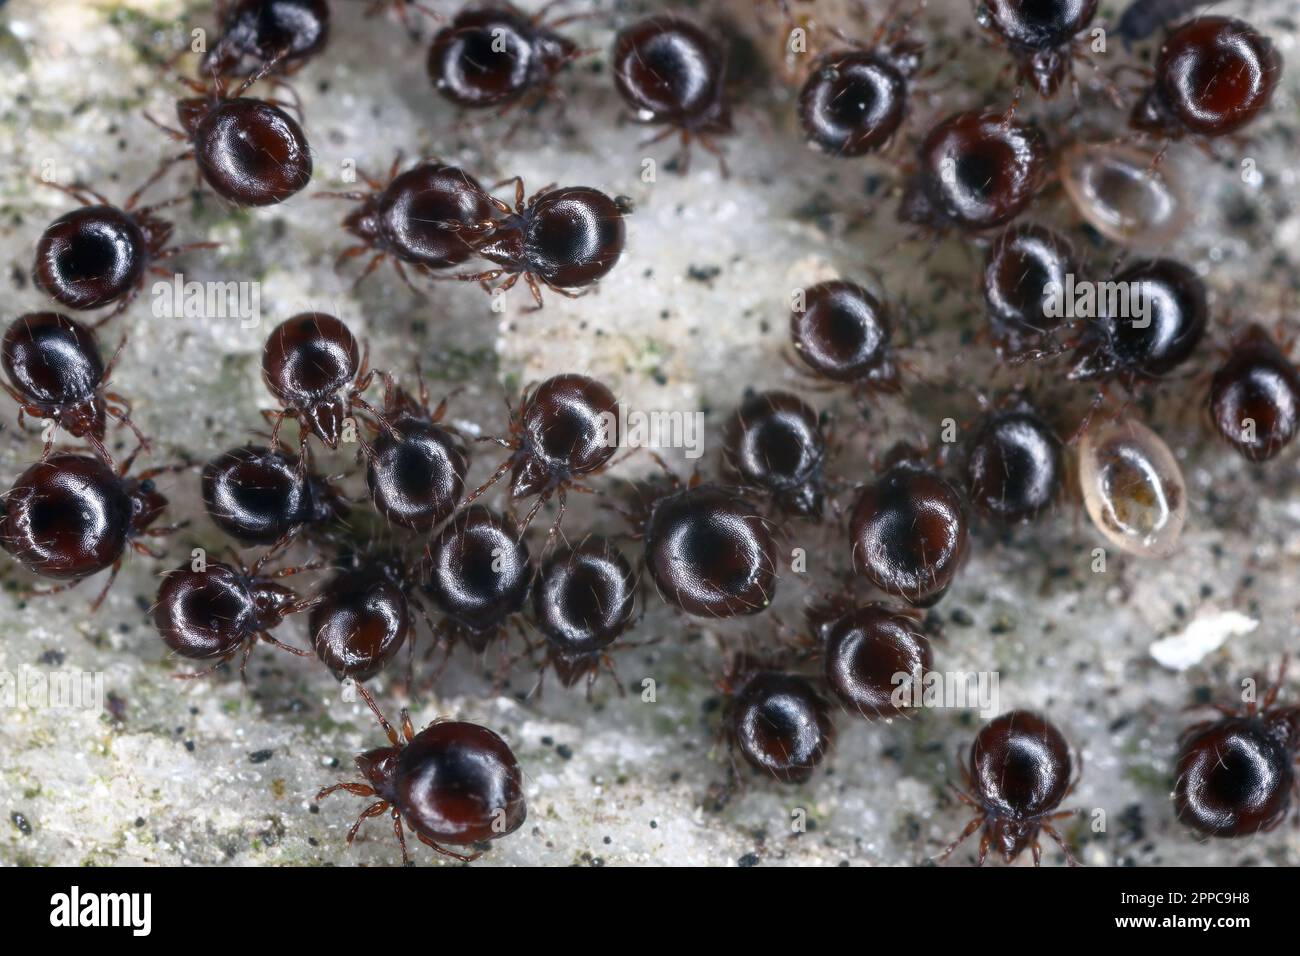 Close up of Beetle Mites also known as oribatid mites. A group of arachnids under a stone. Stock Photo